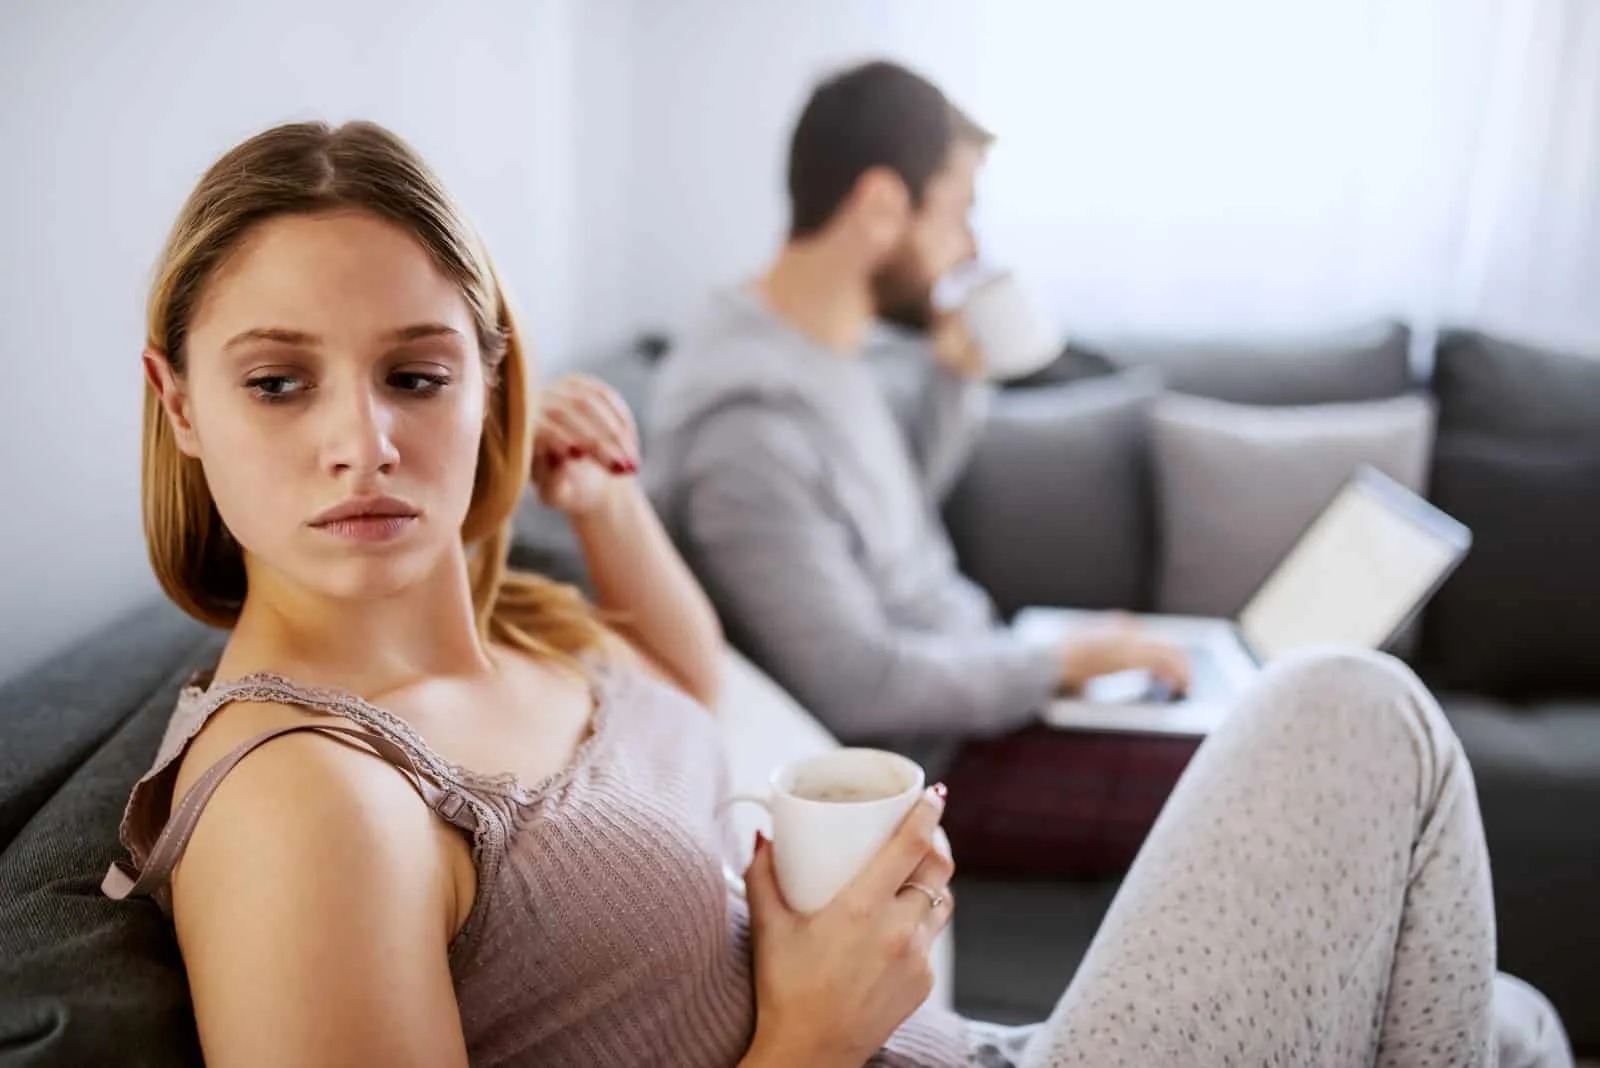 The Surprising Meaning Behind Being Ignored